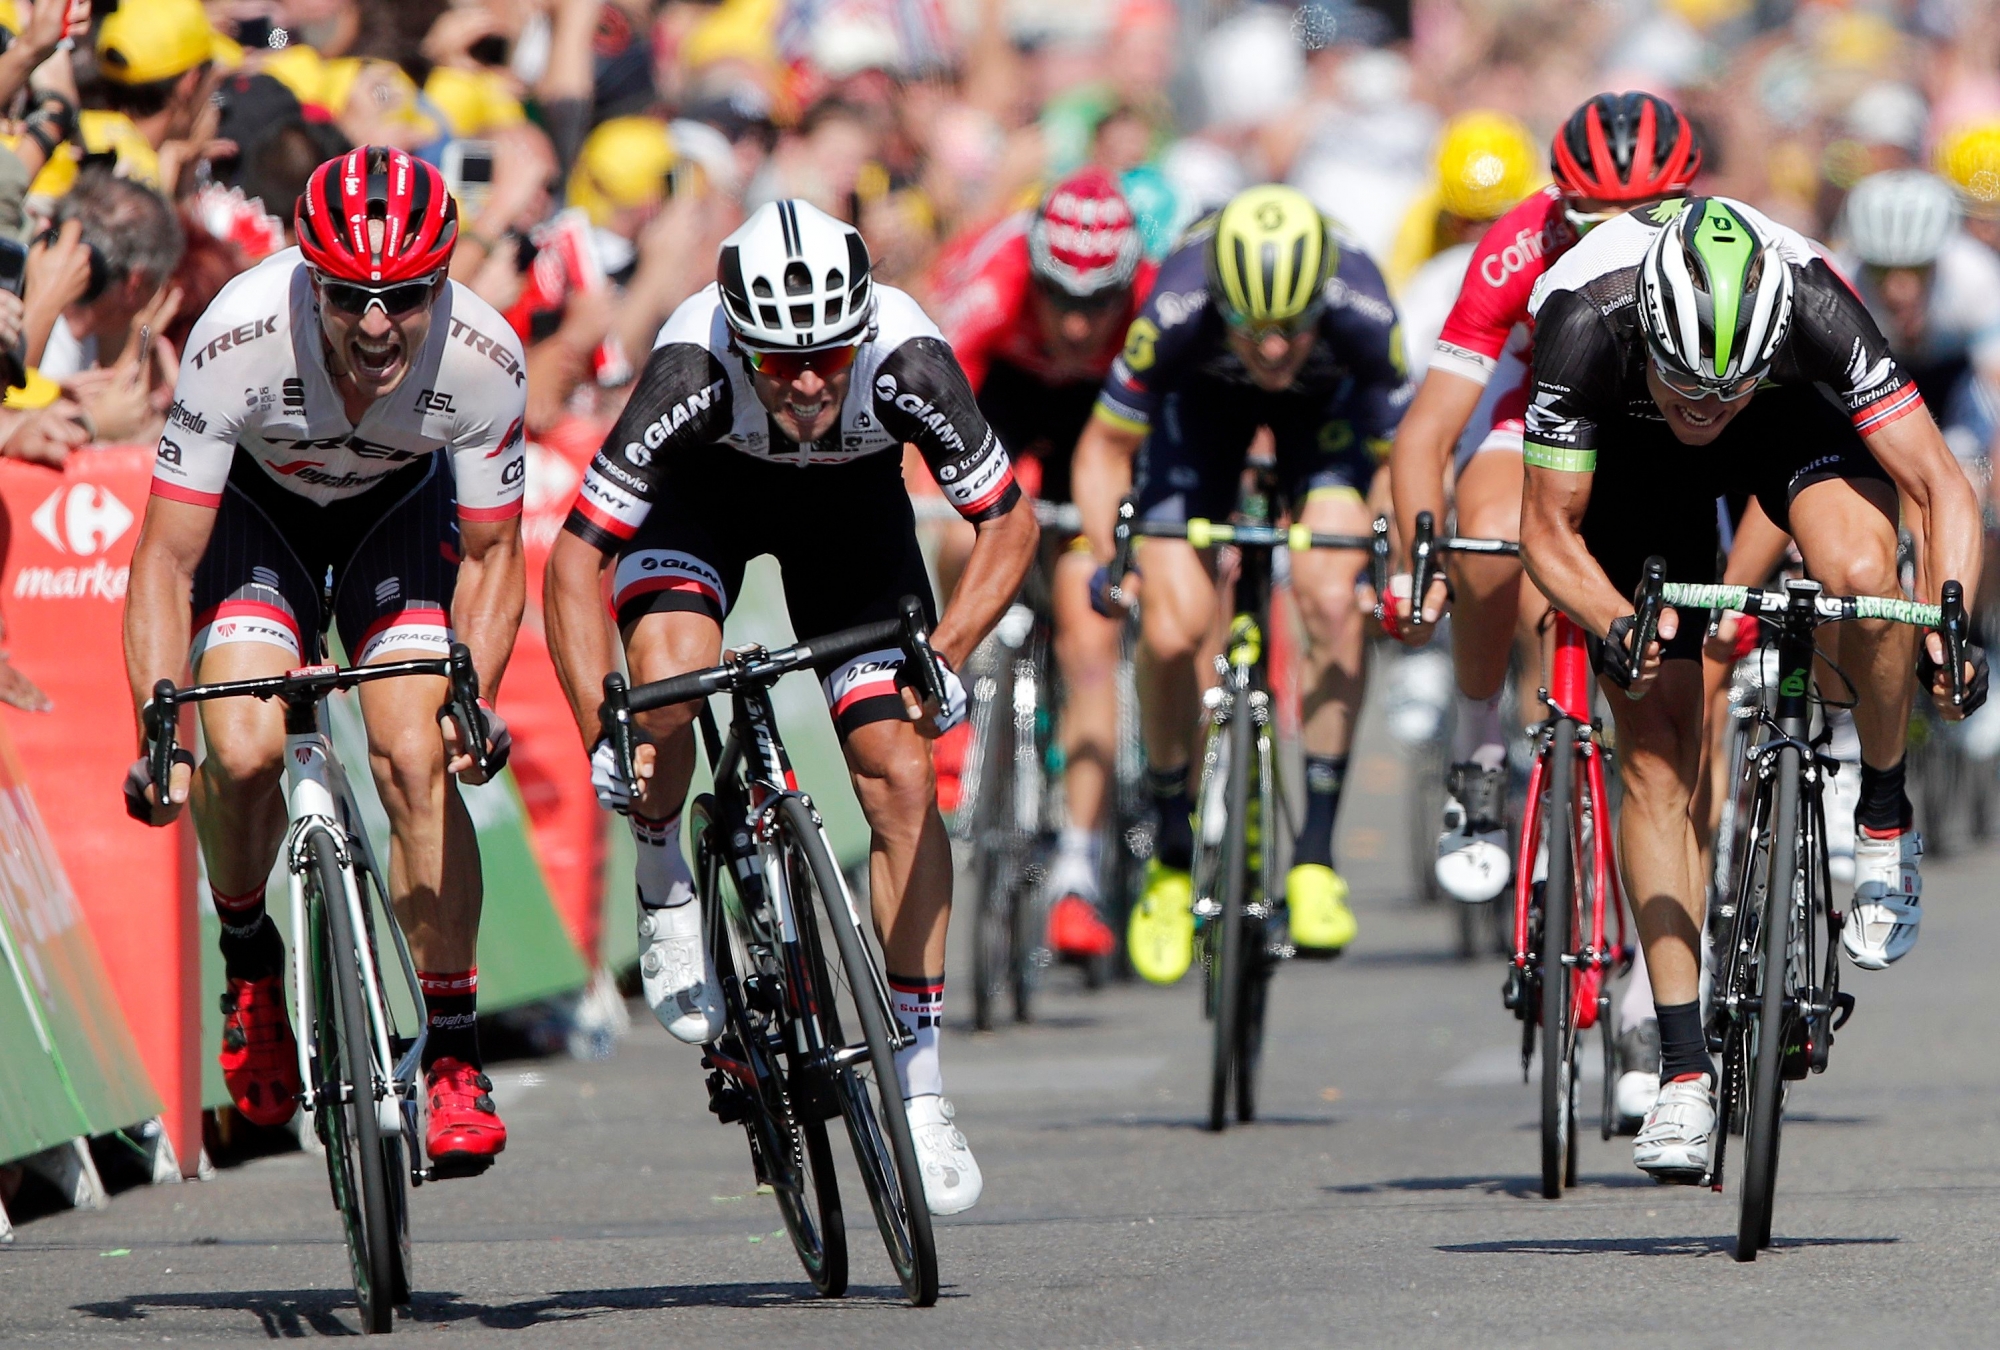 Australia's Michael Matthews, center left, crosses sprints to win the sixteenth stage of the Tour de France cycling race over 165 kilometers (102.5 miles) with start in Le Puy-en-Velay and finish in Romans-sur-Isere, France,, Tuesday, July 18, 2017. Norway's Edvald Boasson Hagen, right, finished second and Germany's John Degenkolb third. (AP Photo/Christophe Ena) FRANCE CYCLING TOUR DE FRANCE